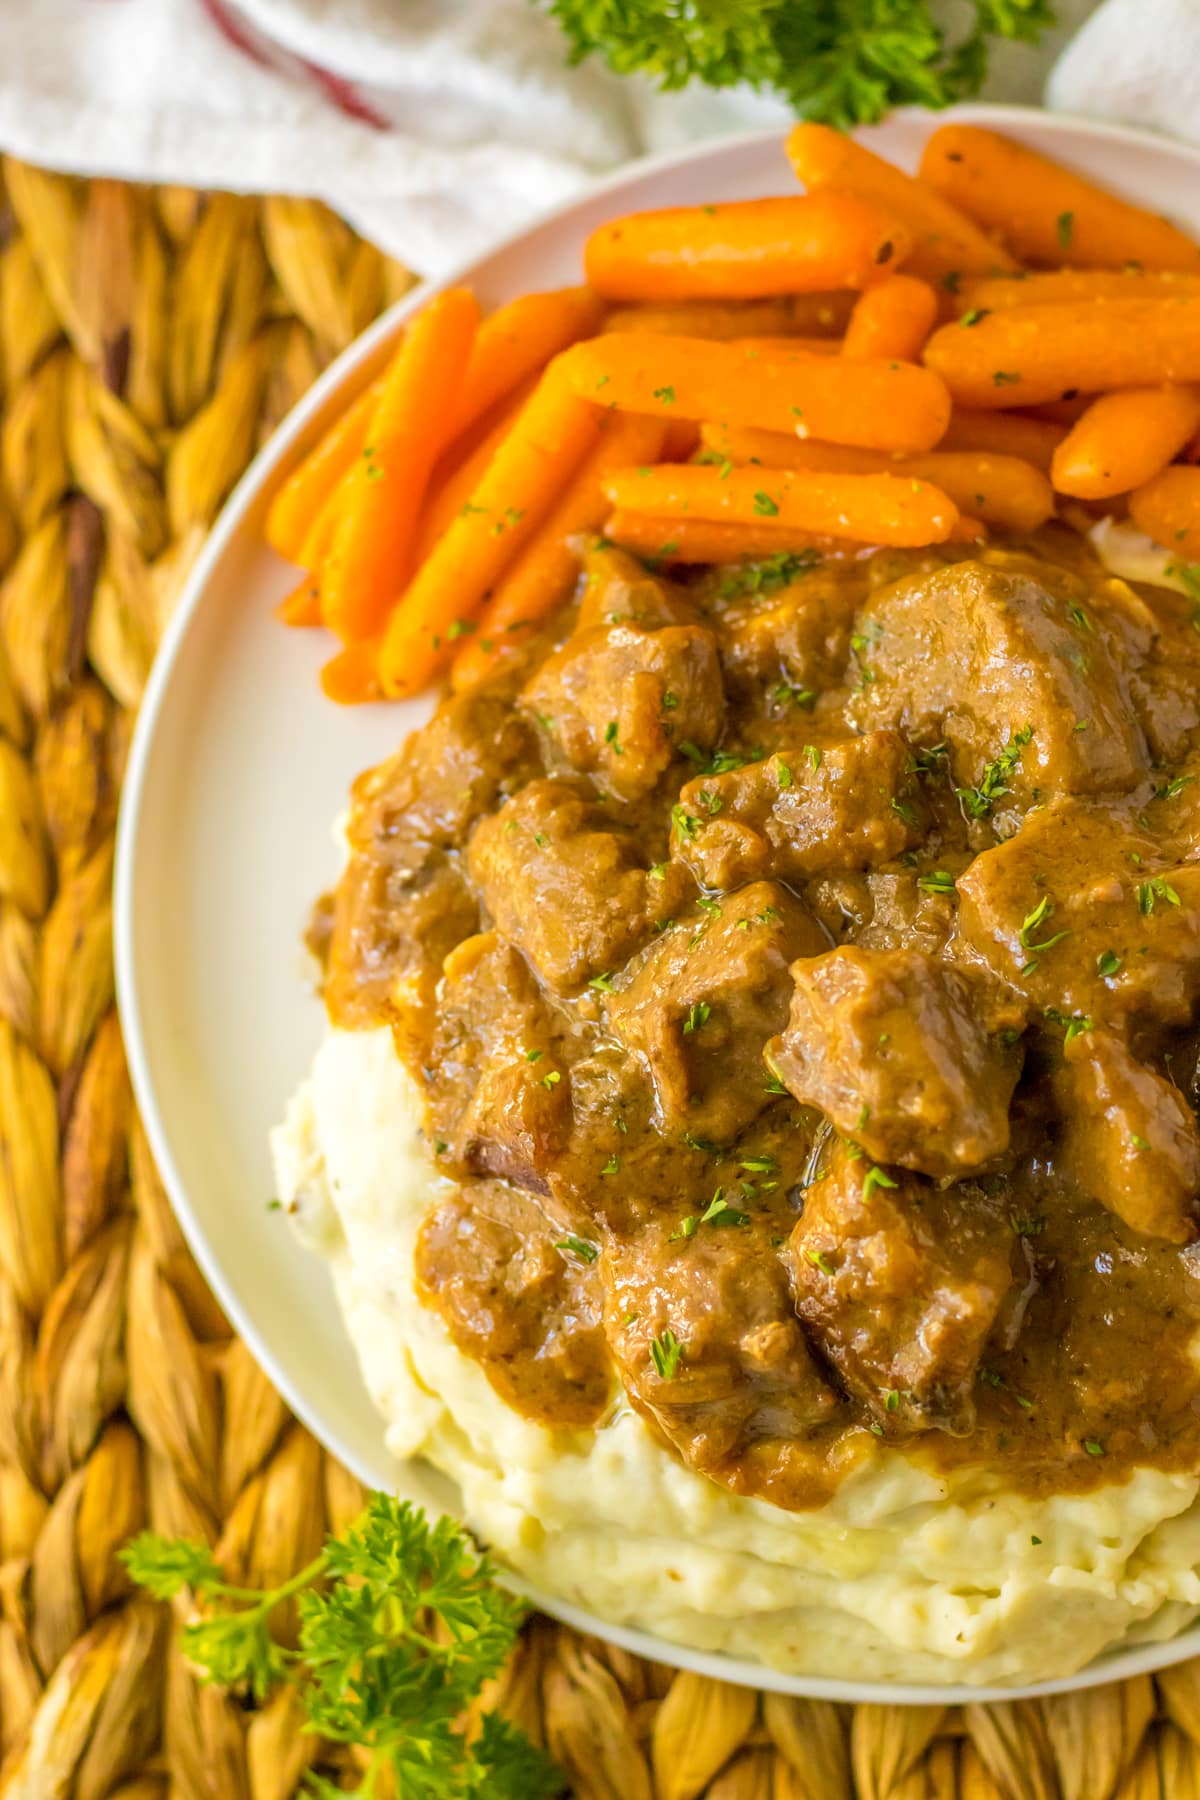 A closer look on a plate of Beef Tips with carrots and mashed potatoes.